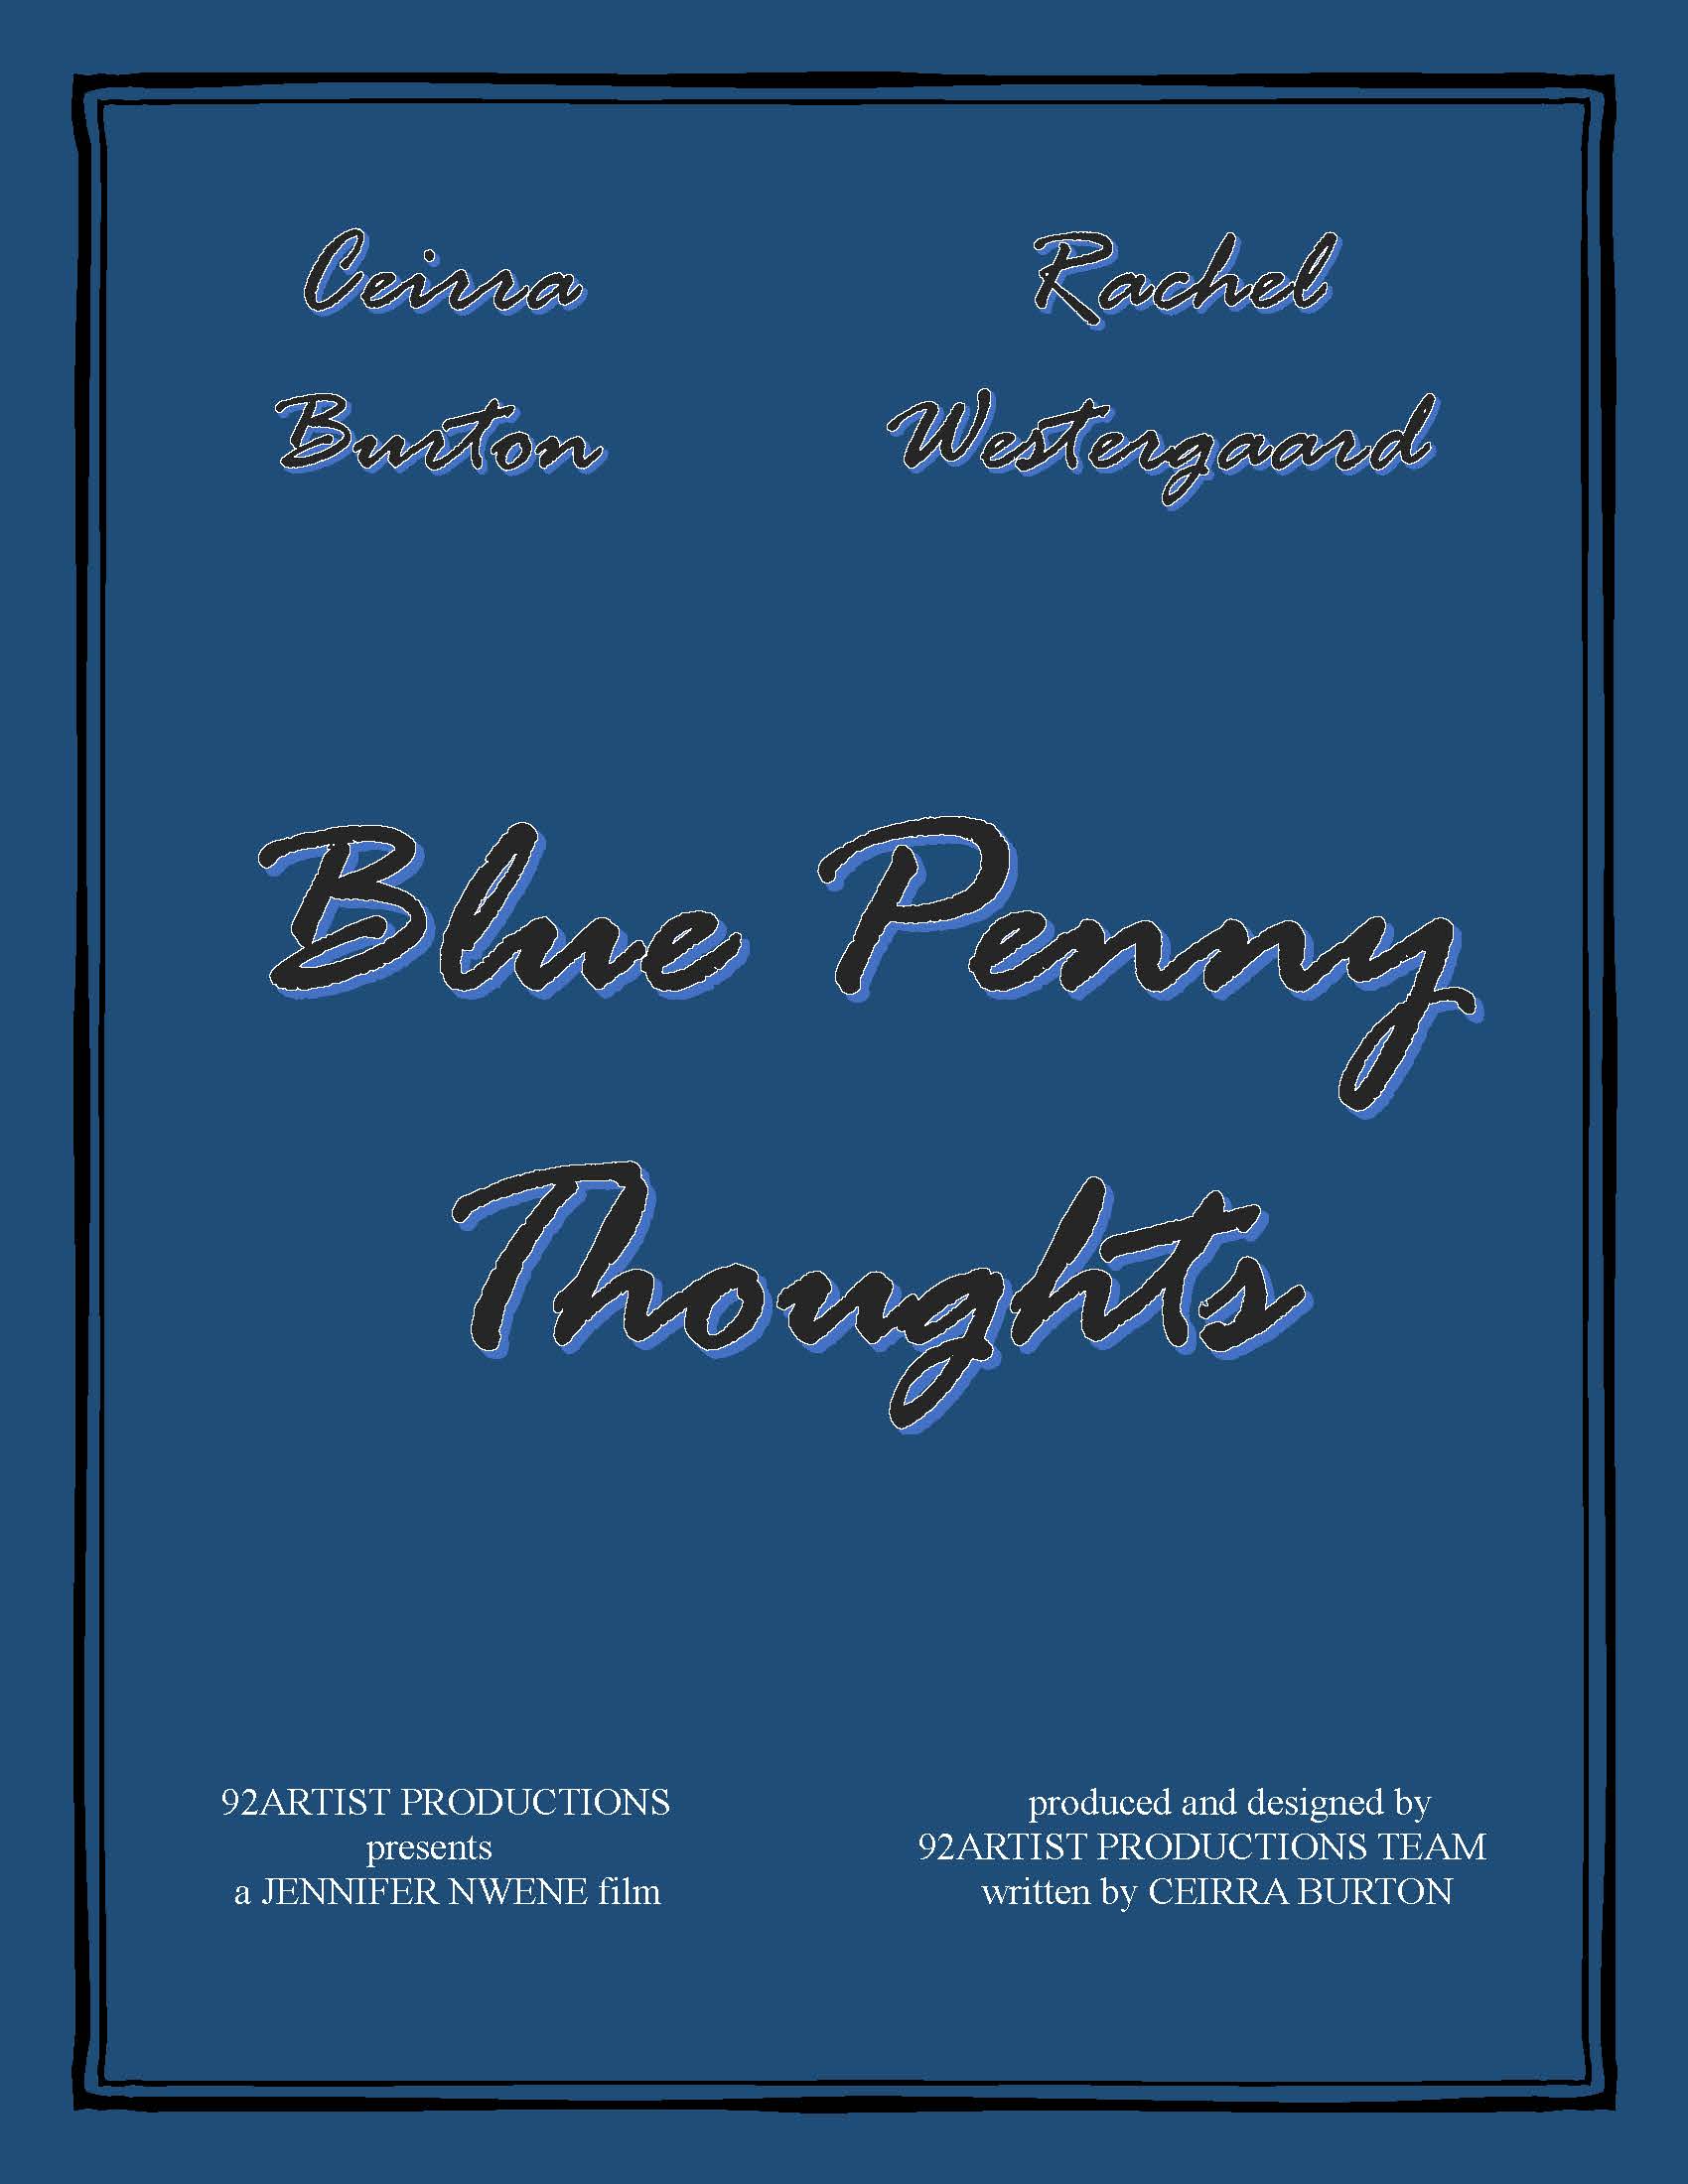 Blue Penny Thoughts Film Poster.jpg